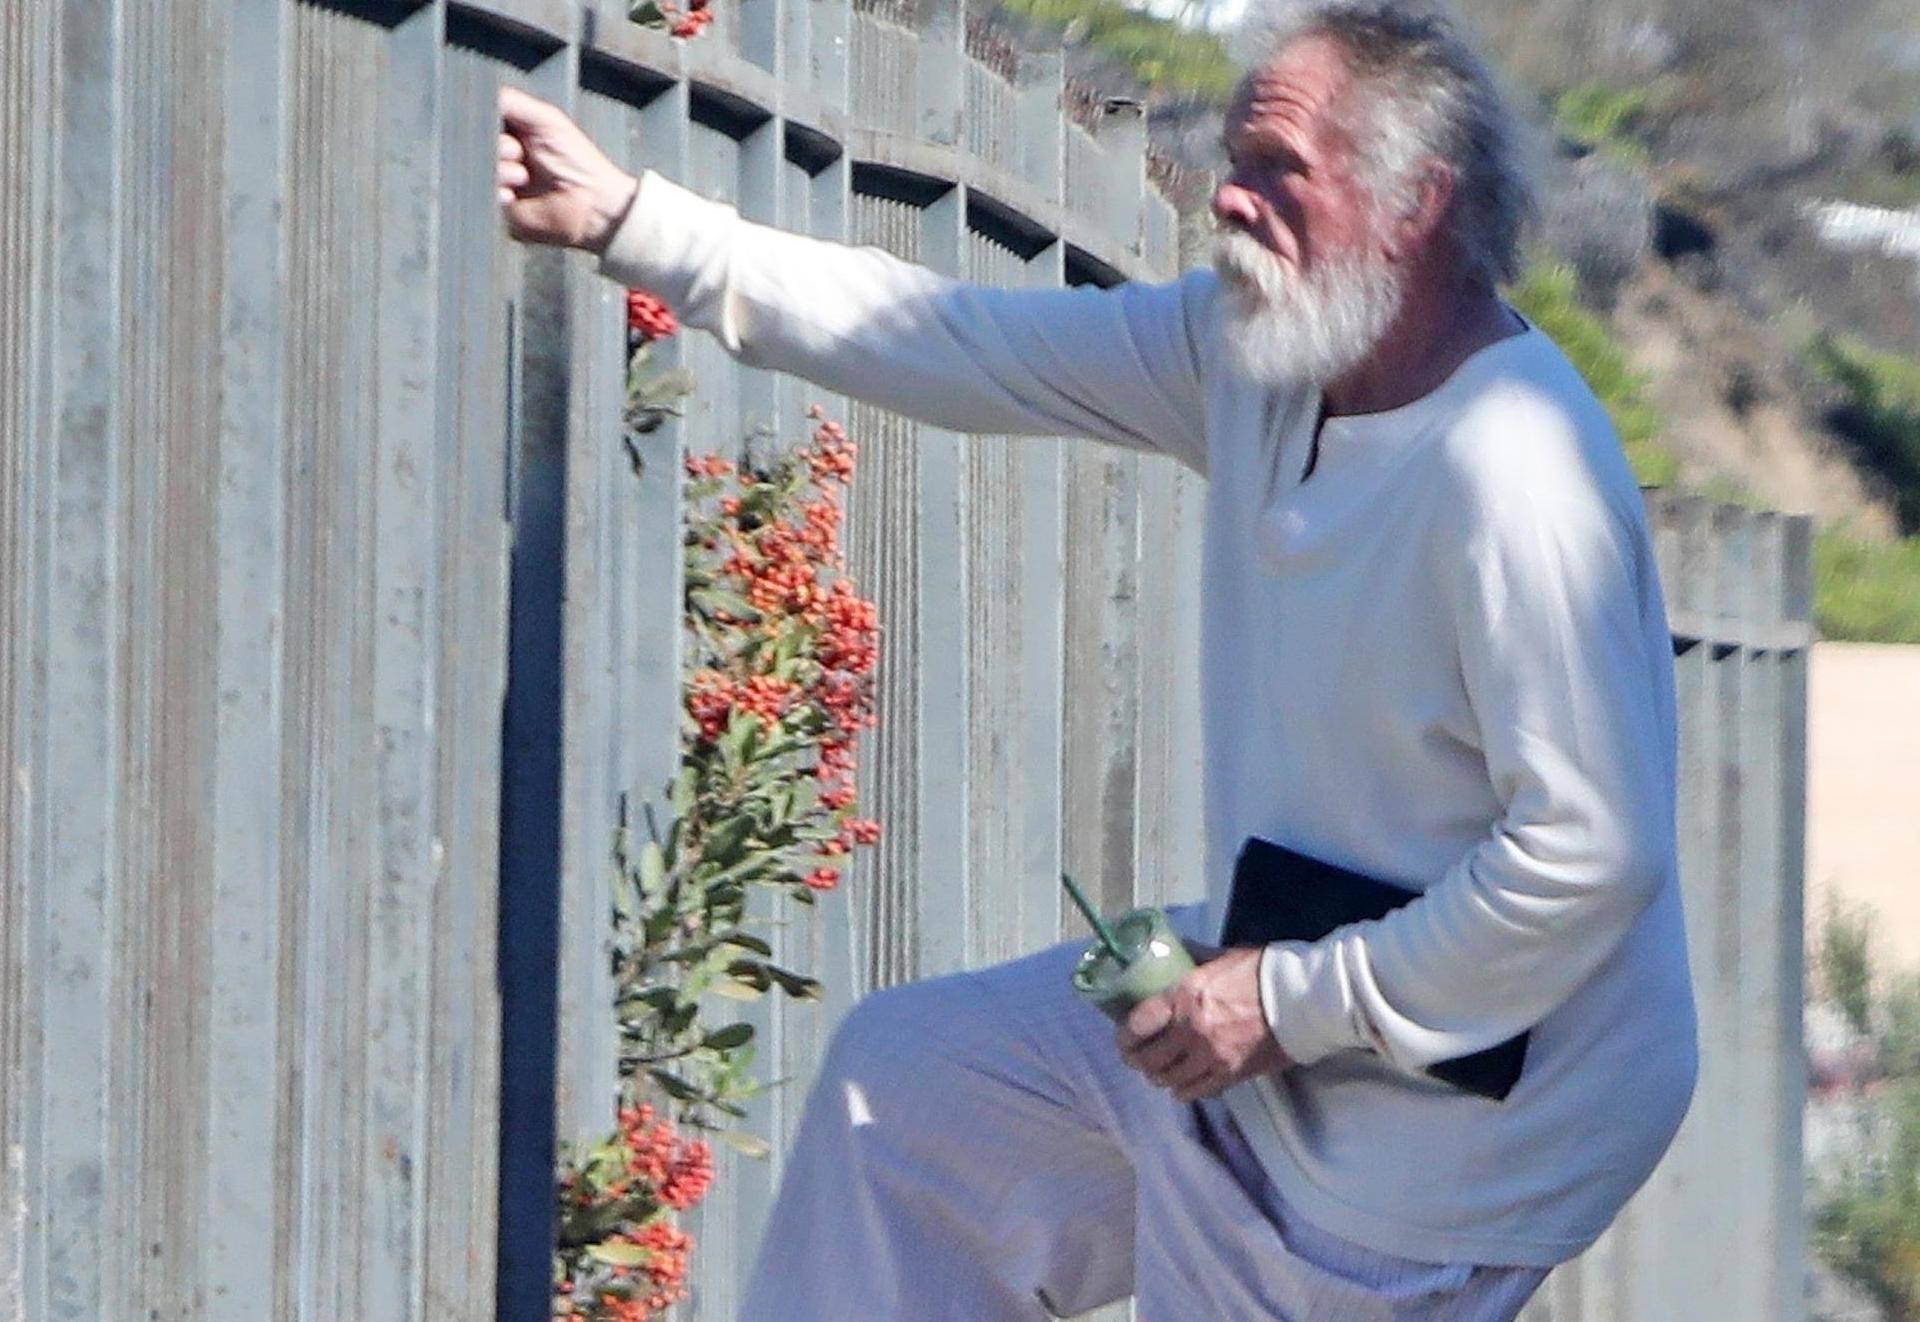 *EXCLUSIVE* Nick Nolte climbs a fence in his PJ's in Malibu